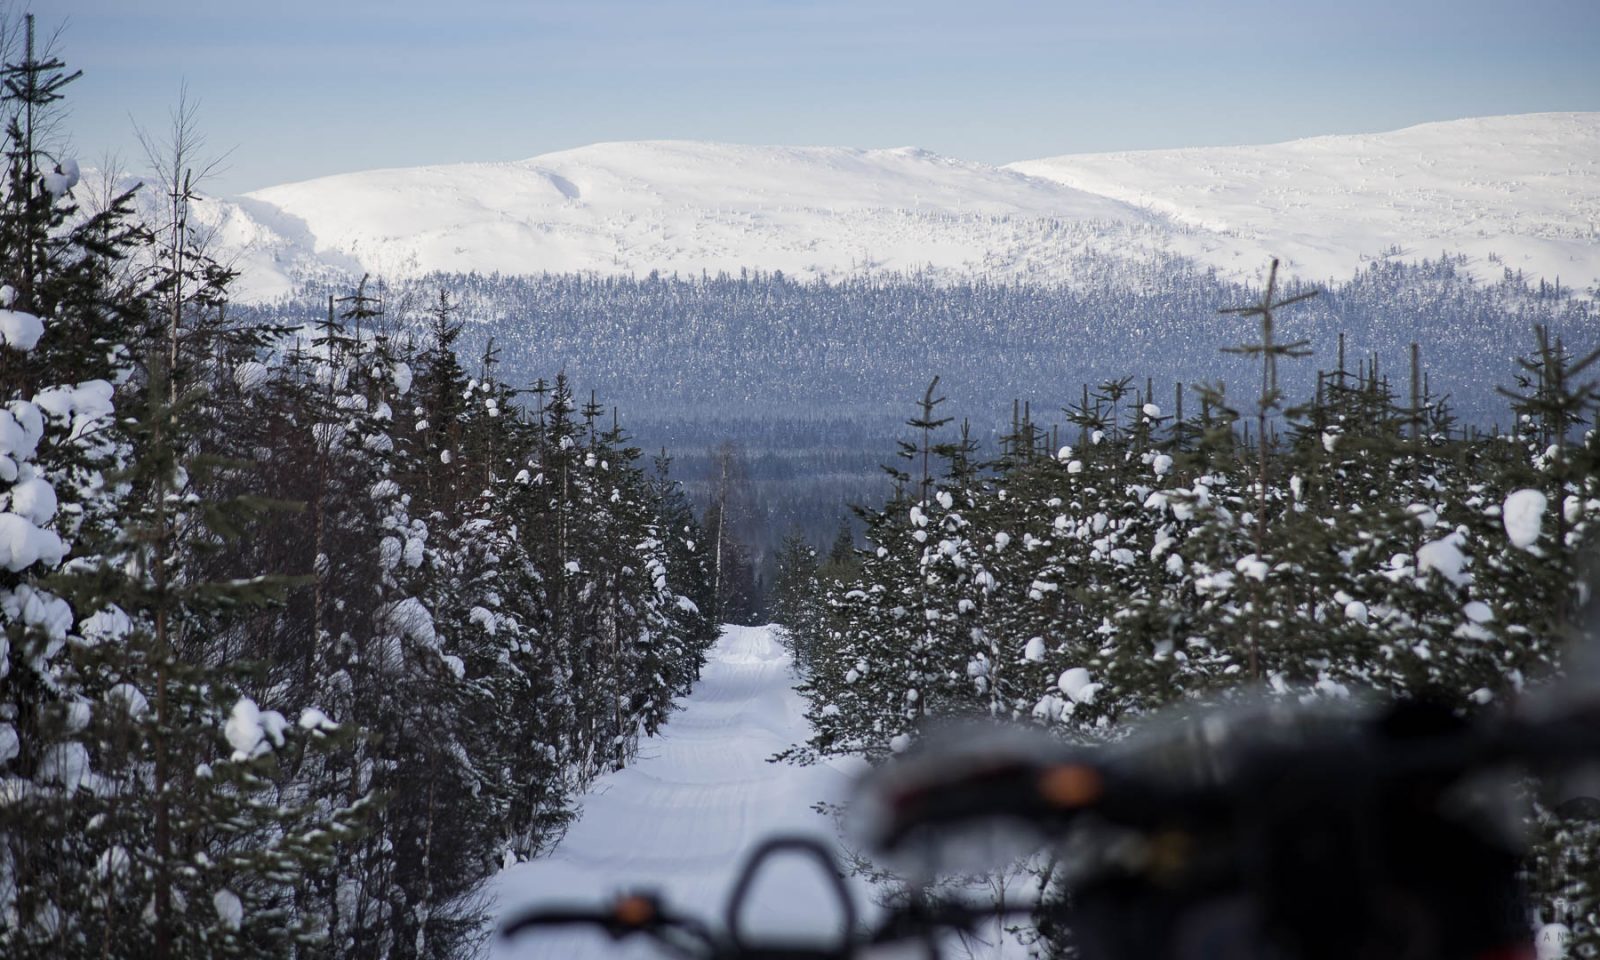 Rovaniemi / Arctic Expeditions - Tour de Lapland. Point of view: on a snowmobile about to ride down a snowy hill surrounded by forest, big snowy hills on background. Wild Nordic Finland @wildnordicfinland